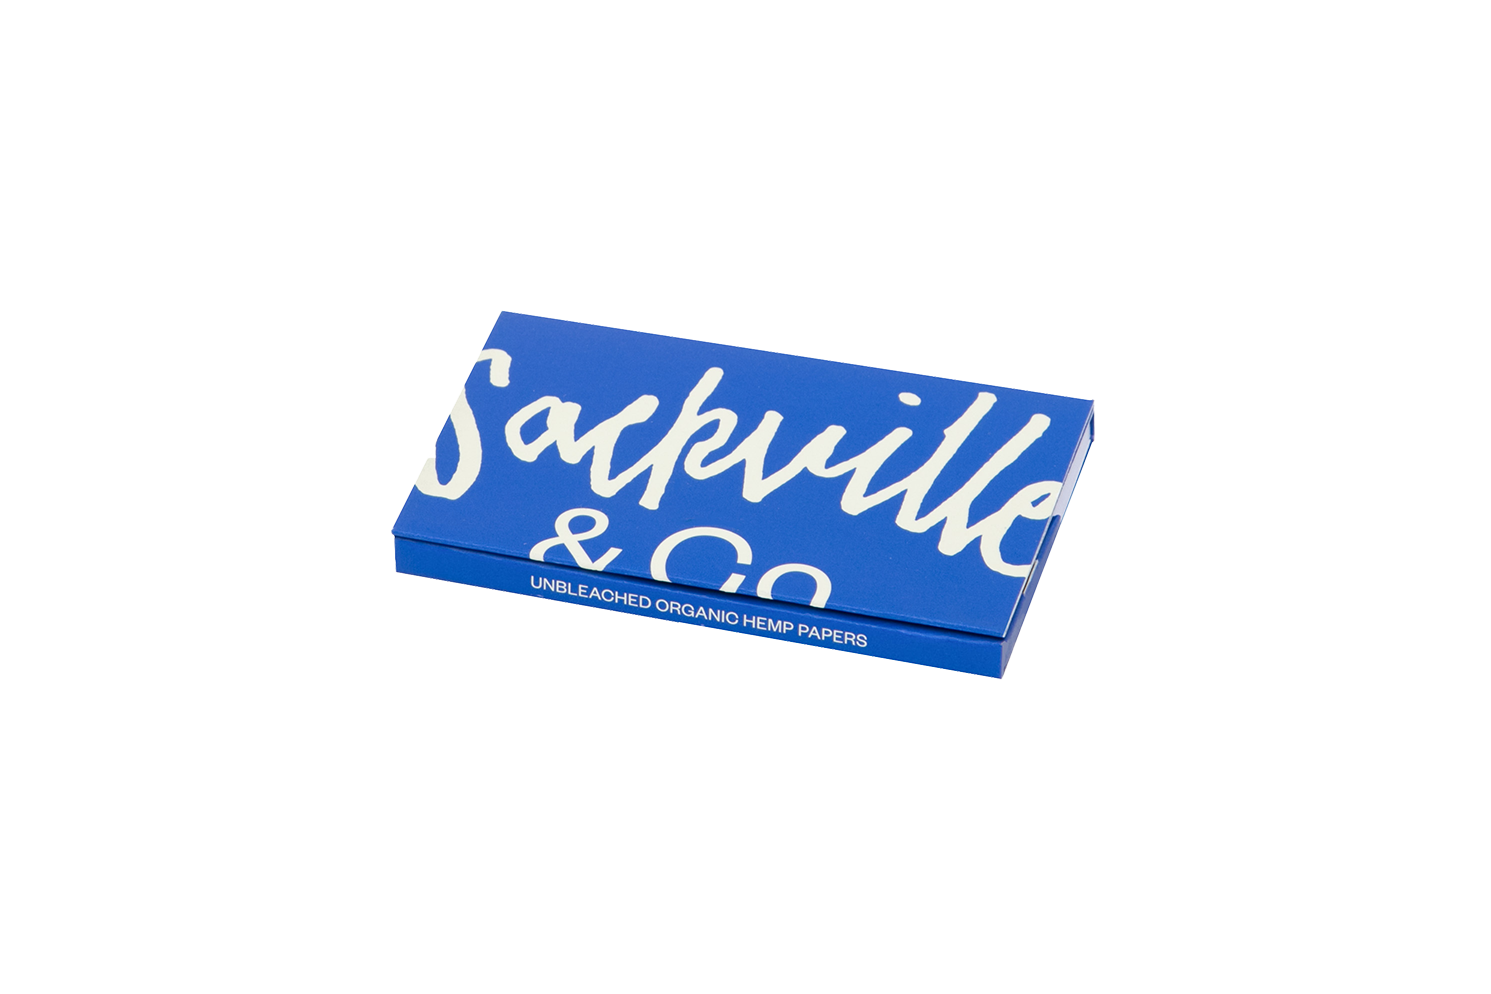 CASE - BLUE ROLLING PAPERS - Sackville & Co.